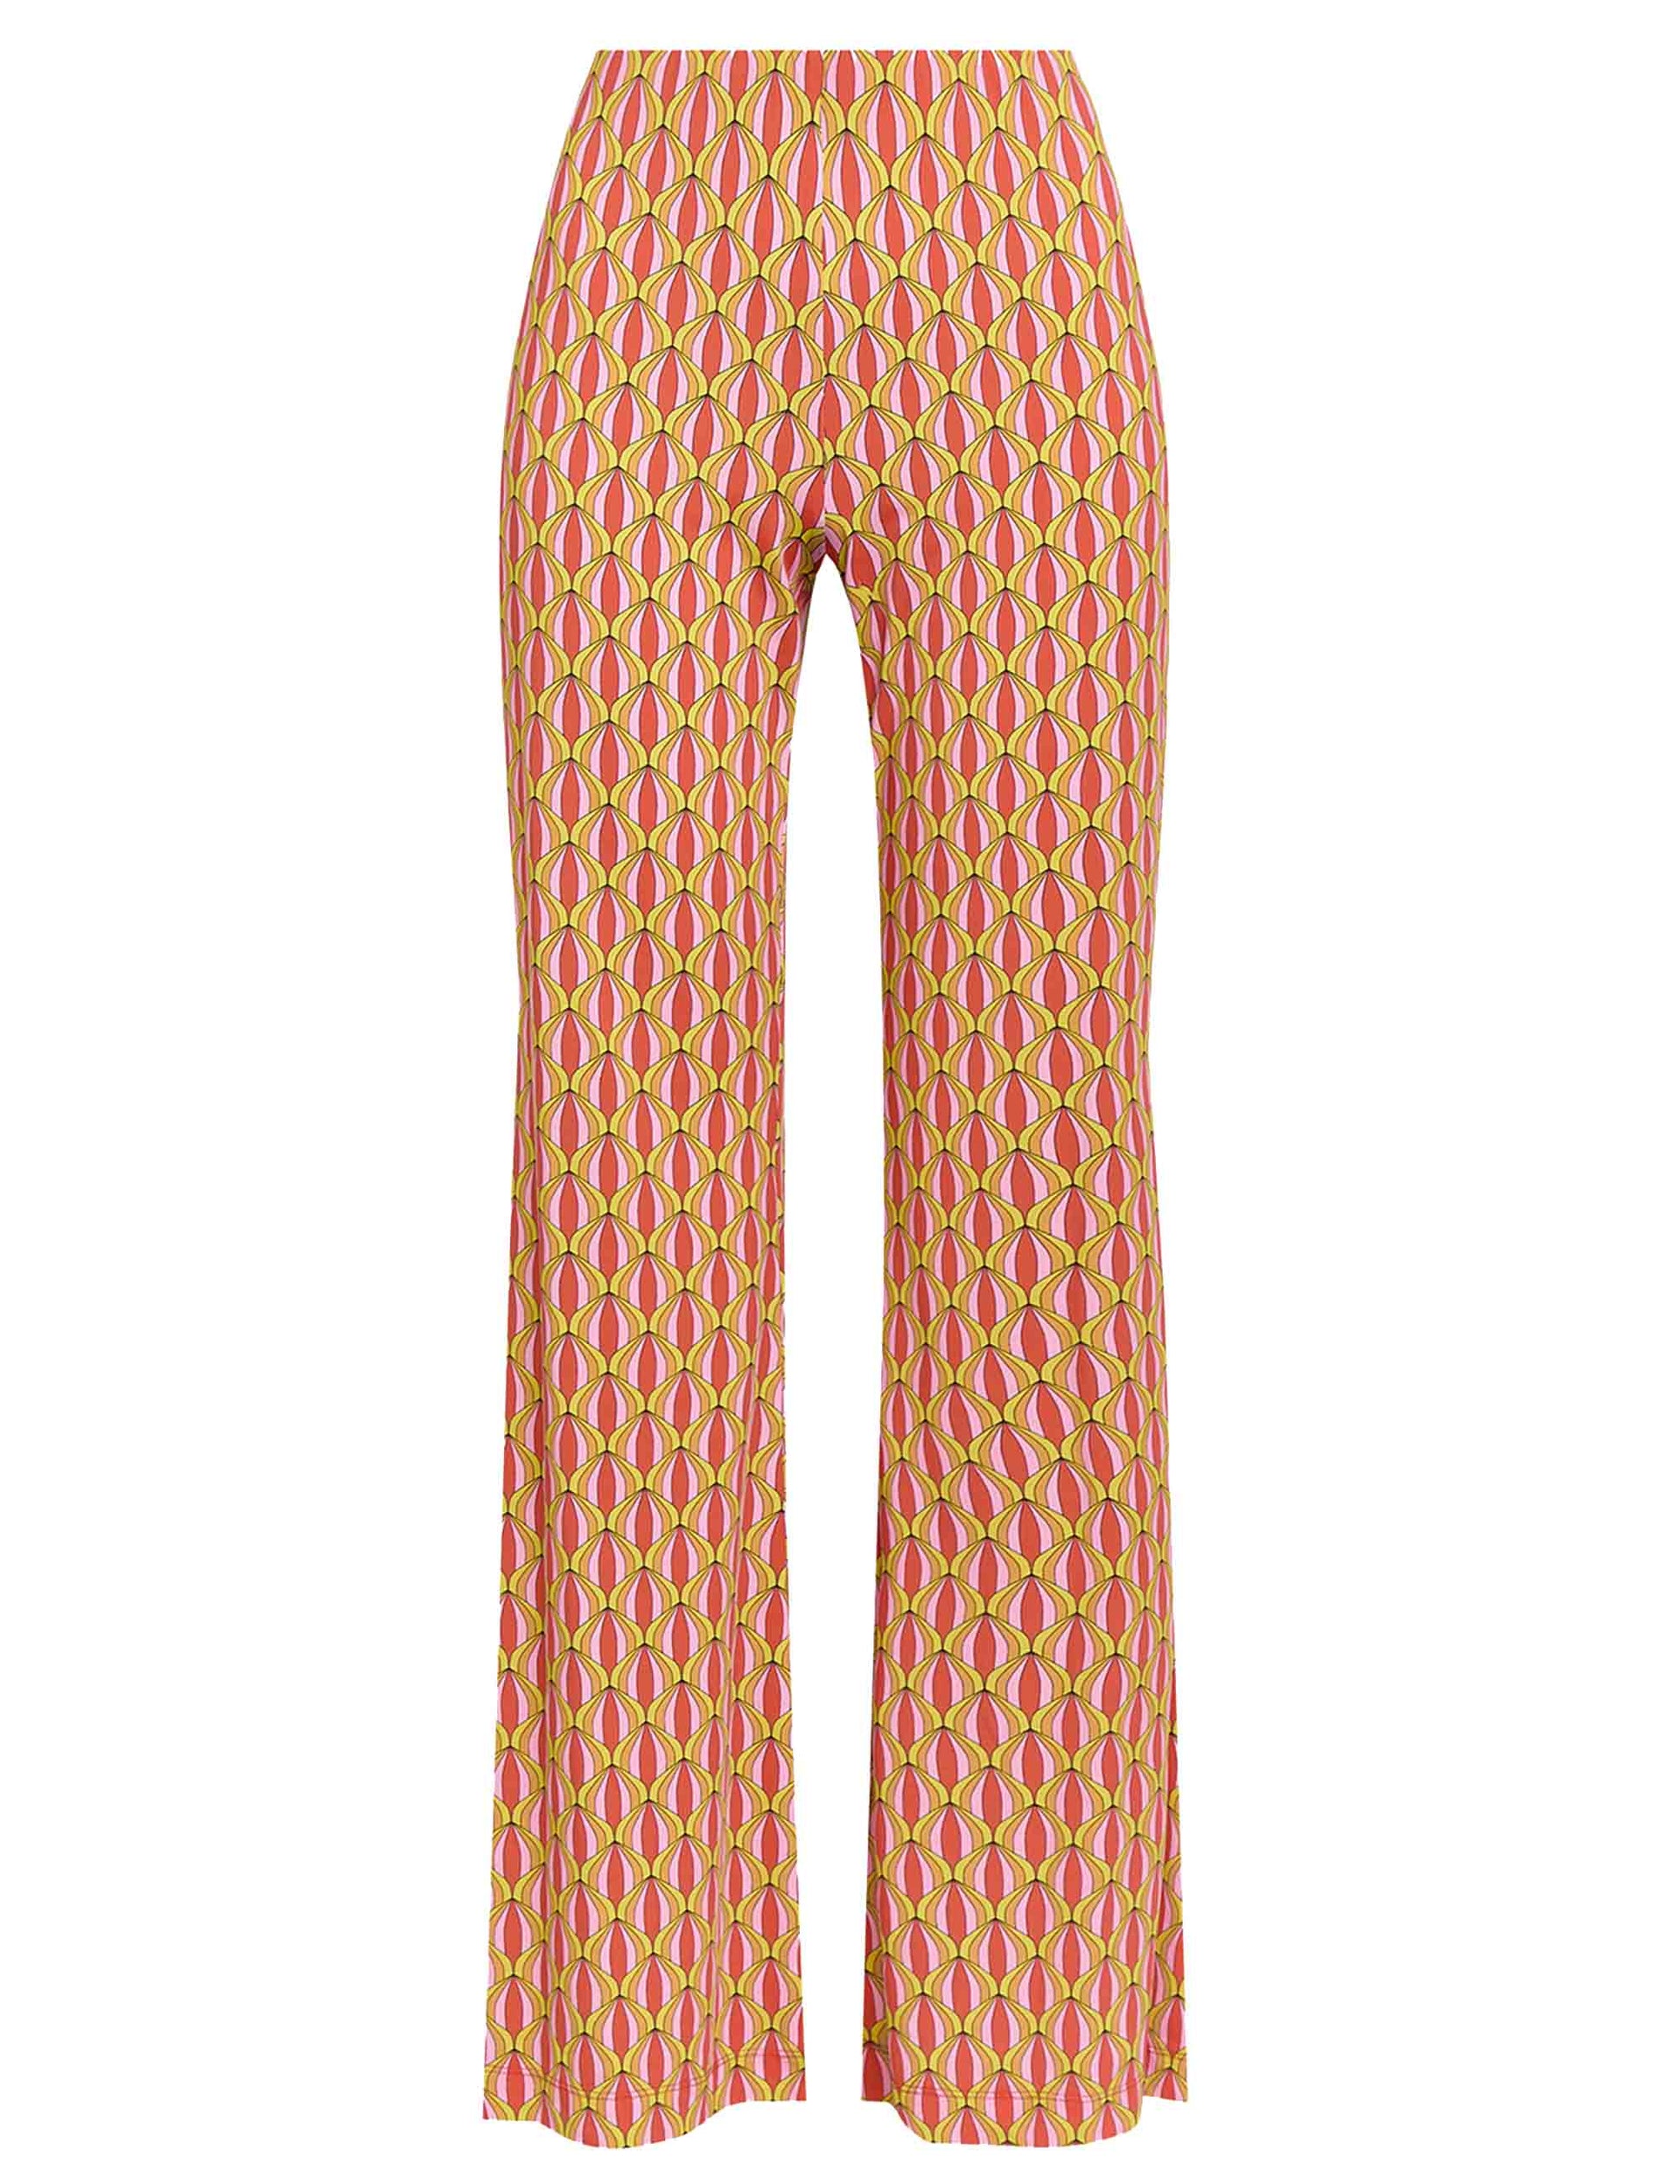 Lucky Balloon women's trousers in pink patterned jersey